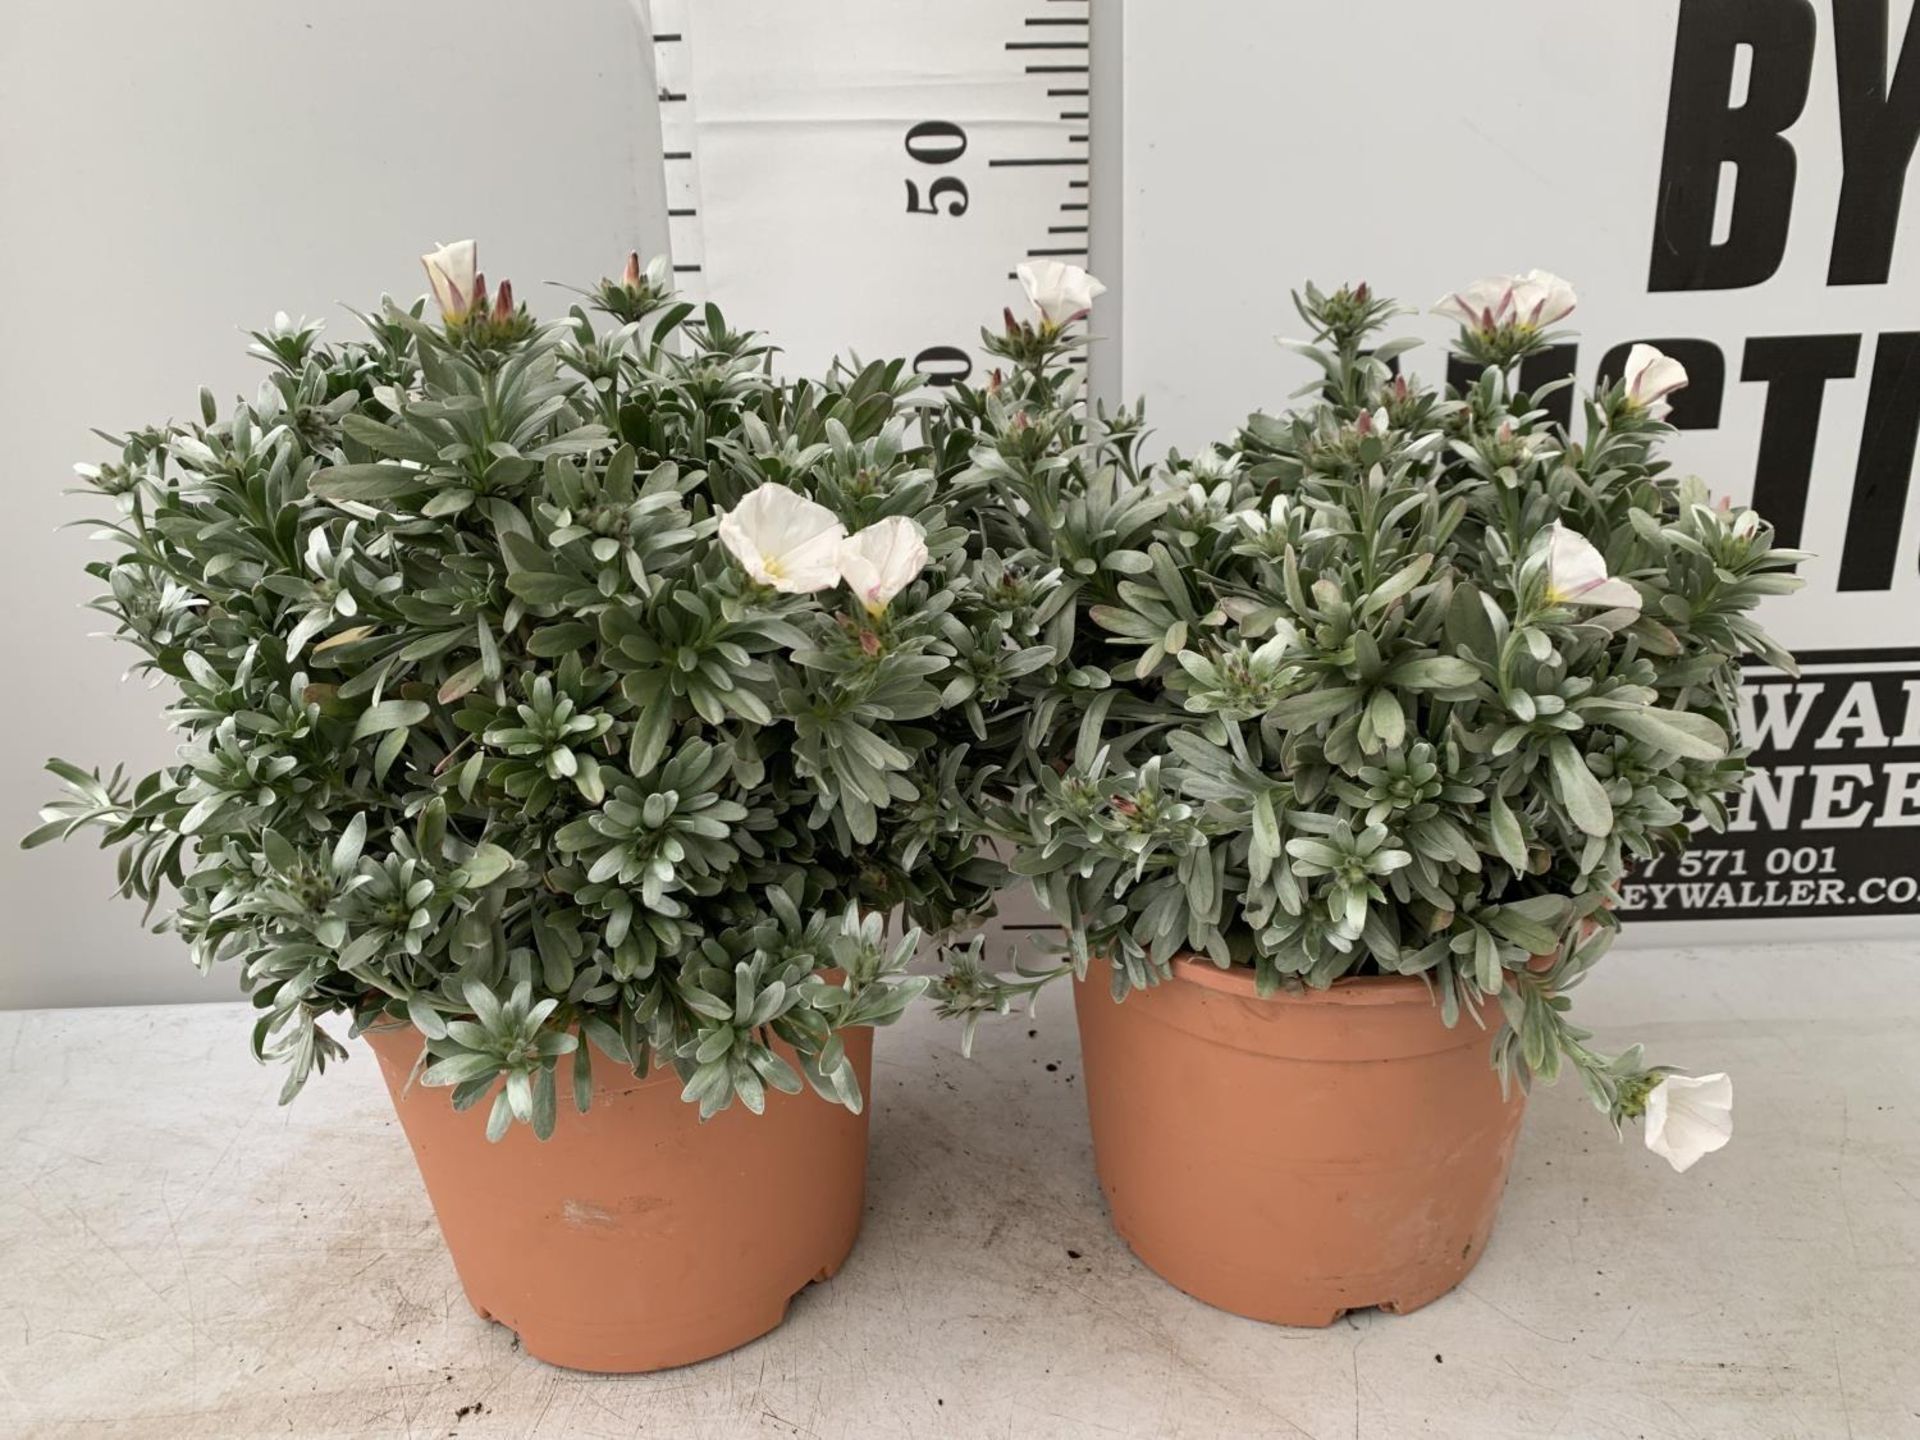 TWO CONVOLVULUS CNEORUM WITH WHITE FLOWERS IN 5 LTR POTS APPROX 45CM IN HEIGHT PLUS VAT TO BE SOLD - Image 2 of 8